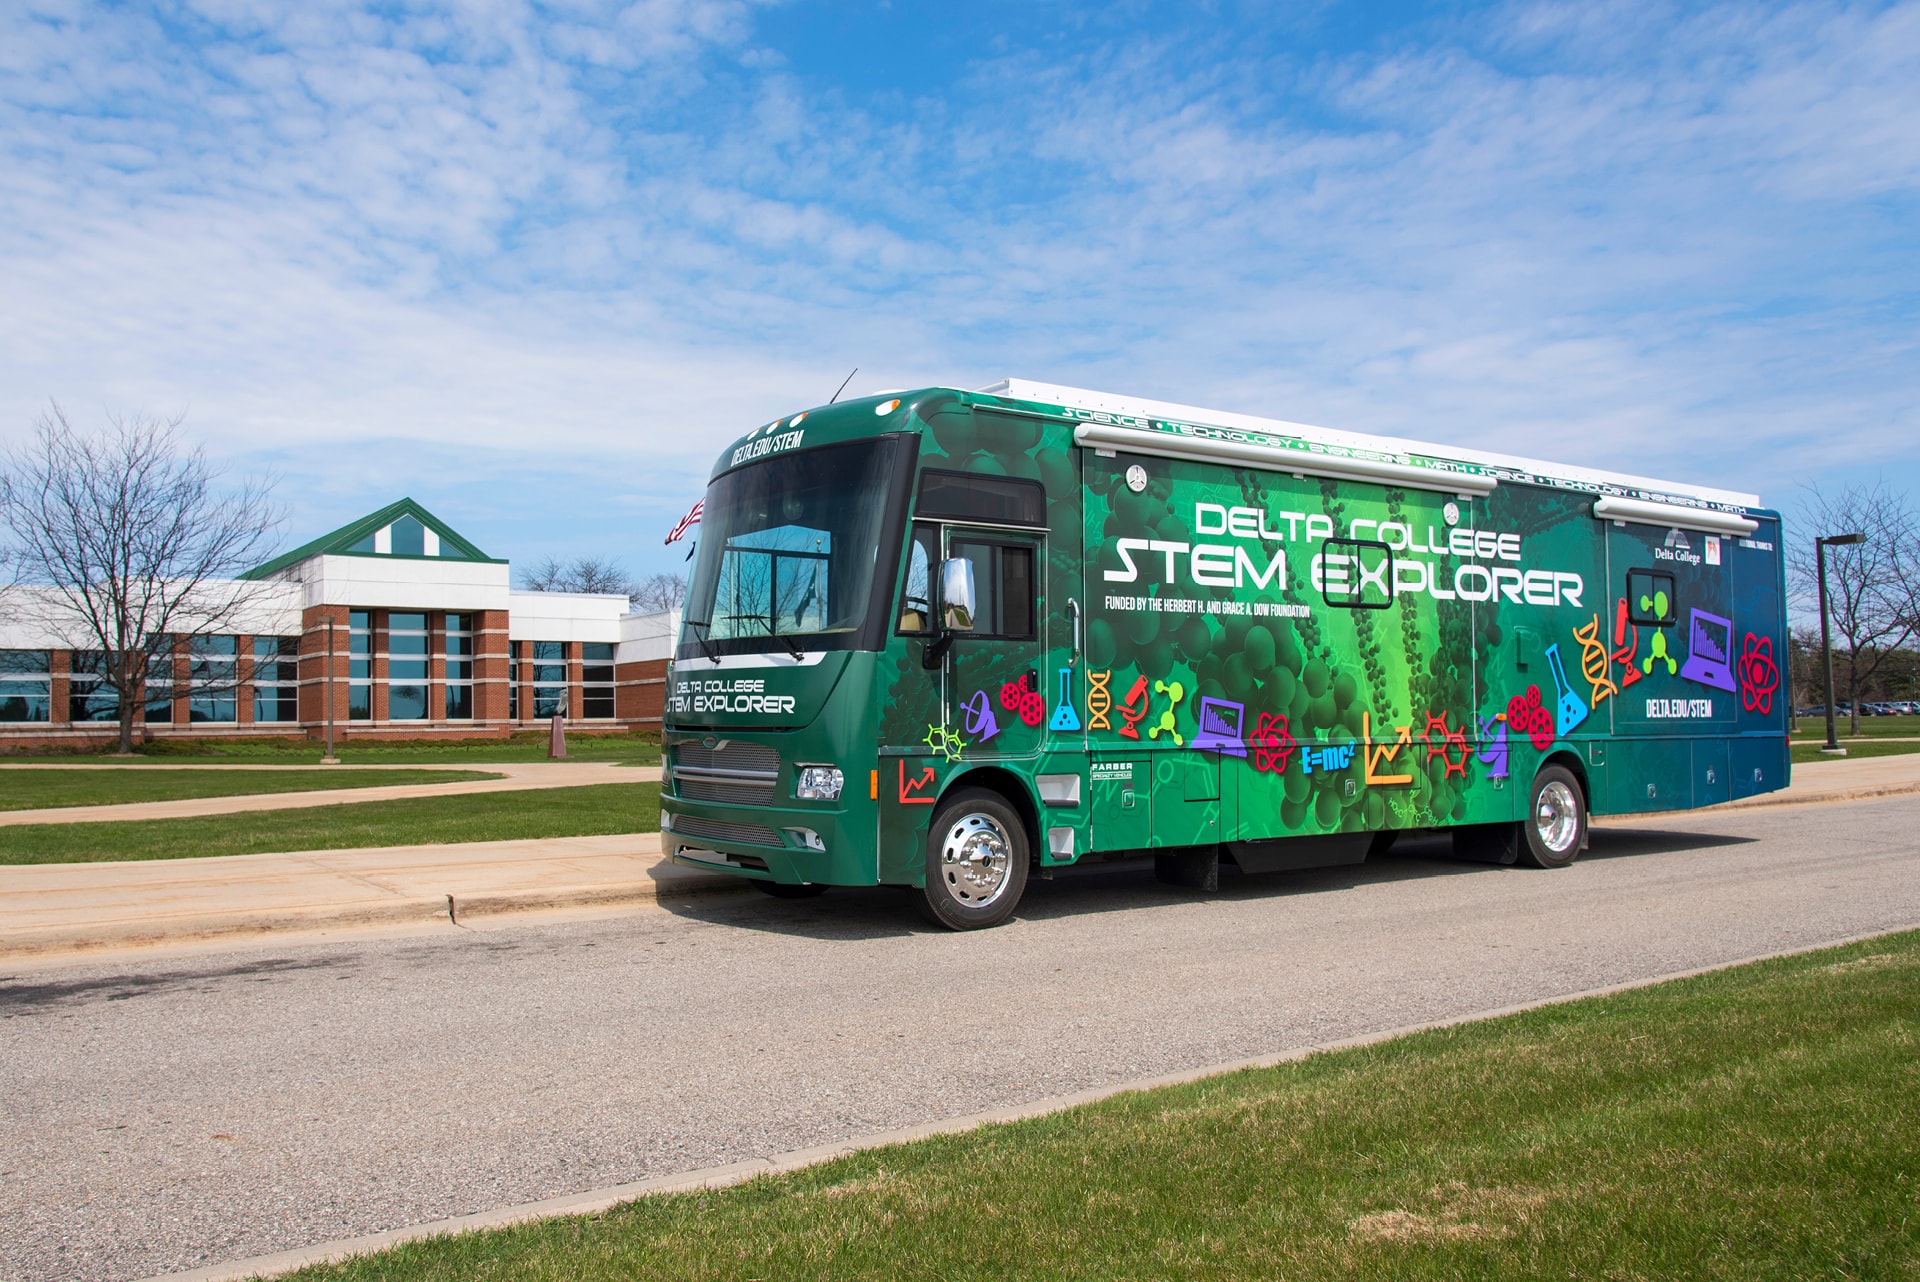 STEM Explorer parked in front of Delta Main Campus